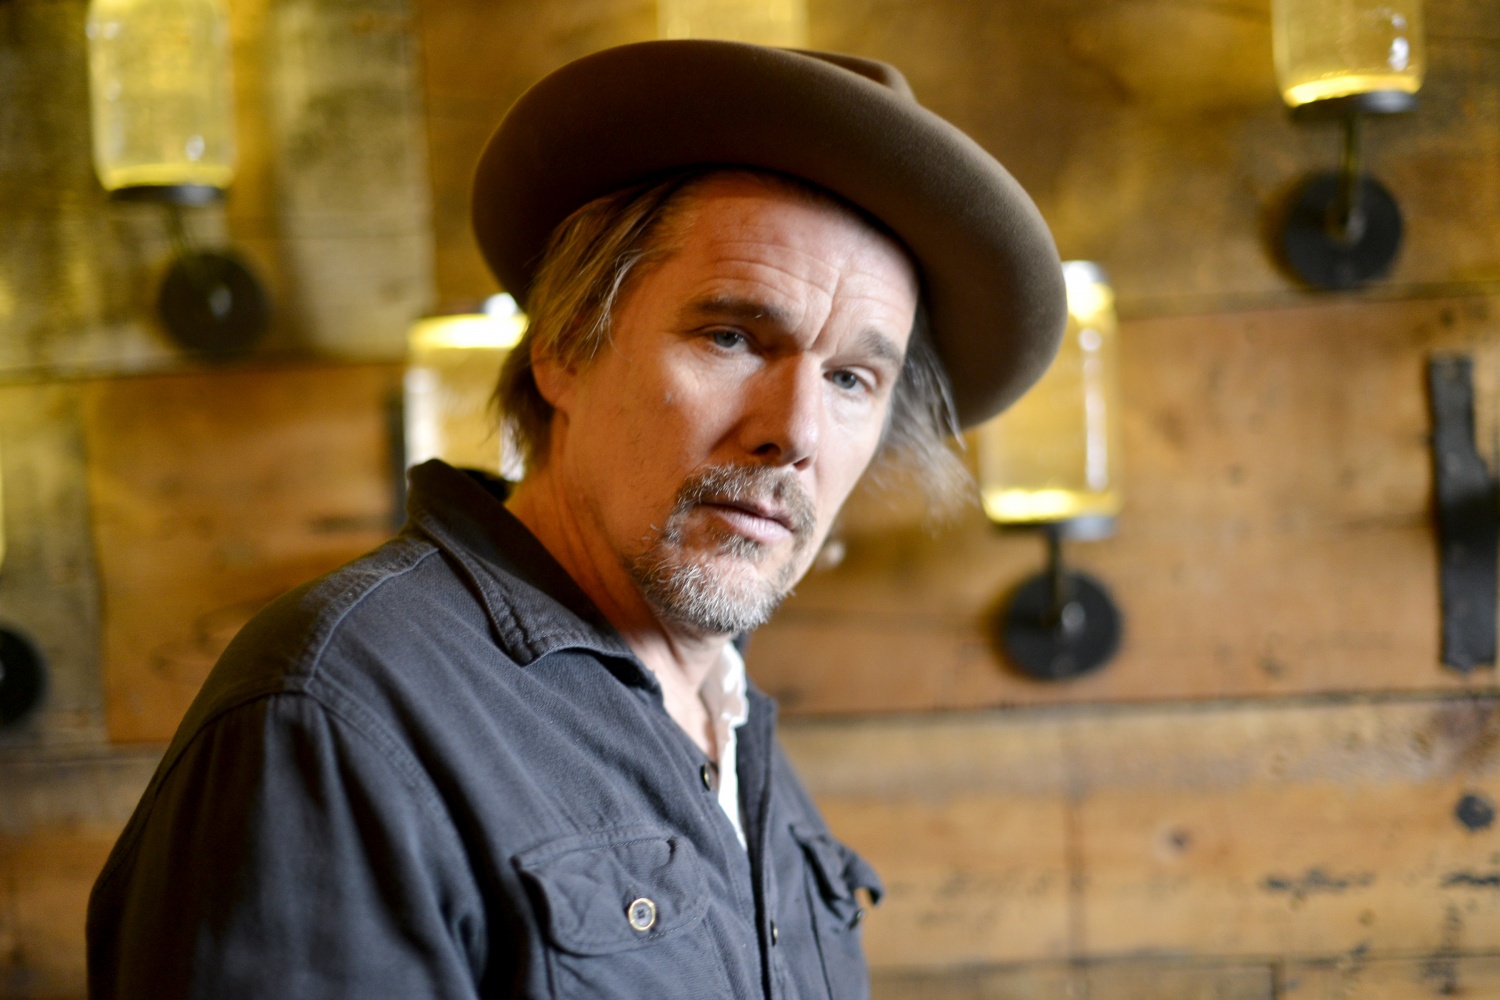  Ethan Hawke attends the 2020 Sundance Film Festival - Alfred P. Sloan Foundation Feature Film Prize Reception at High West Distillery on January 28, 2020 in Park City, Utah. (Photo by Jerod Harris/Getty Images)